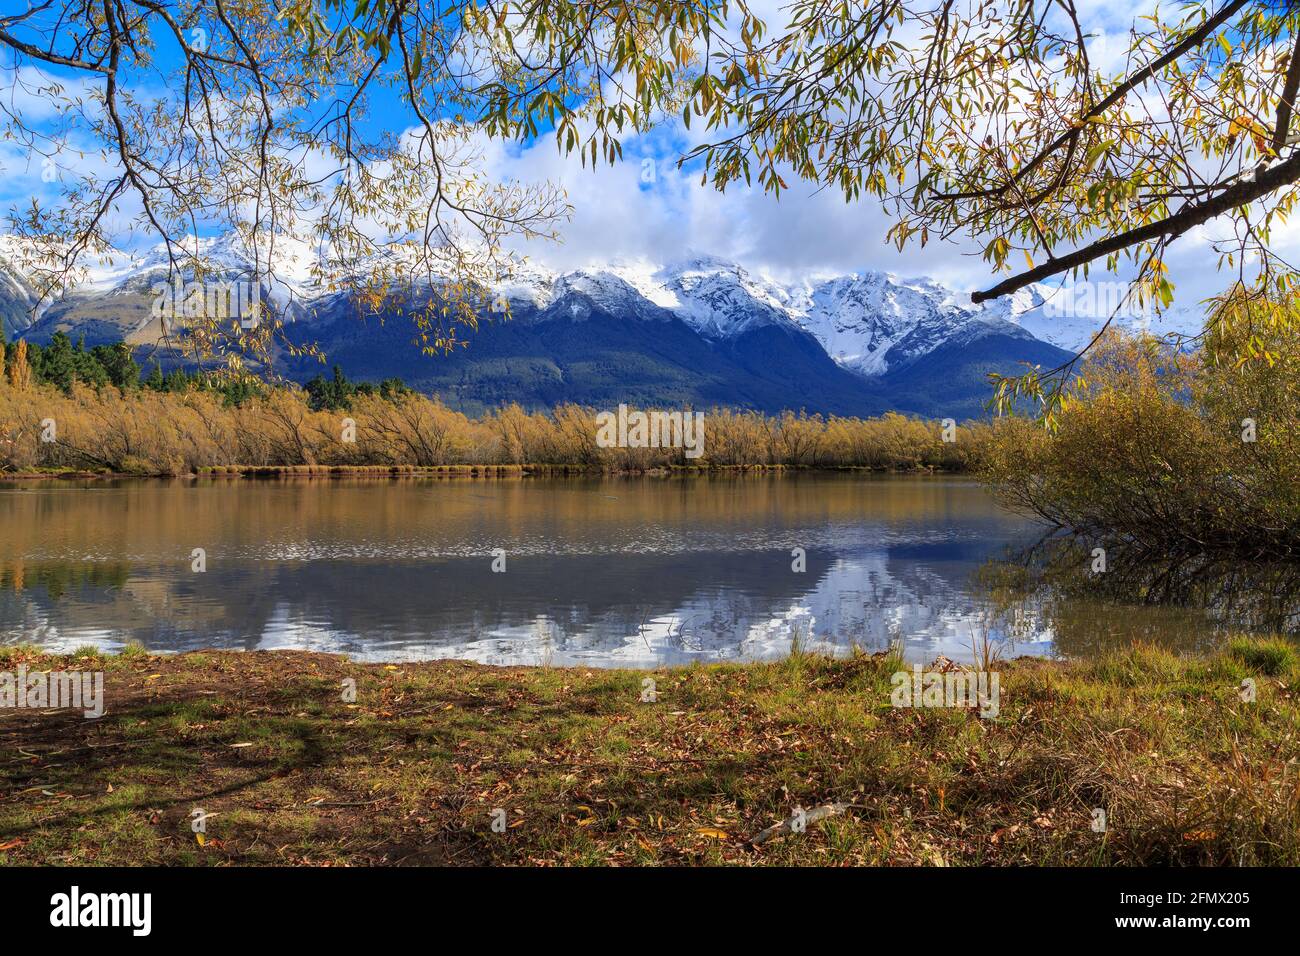 The Glenorchy Lagoon, a beautiful wetland near Glenorchy, New Zealand, surrounded by autumn willows with the Southern Alps in the background Stock Photo